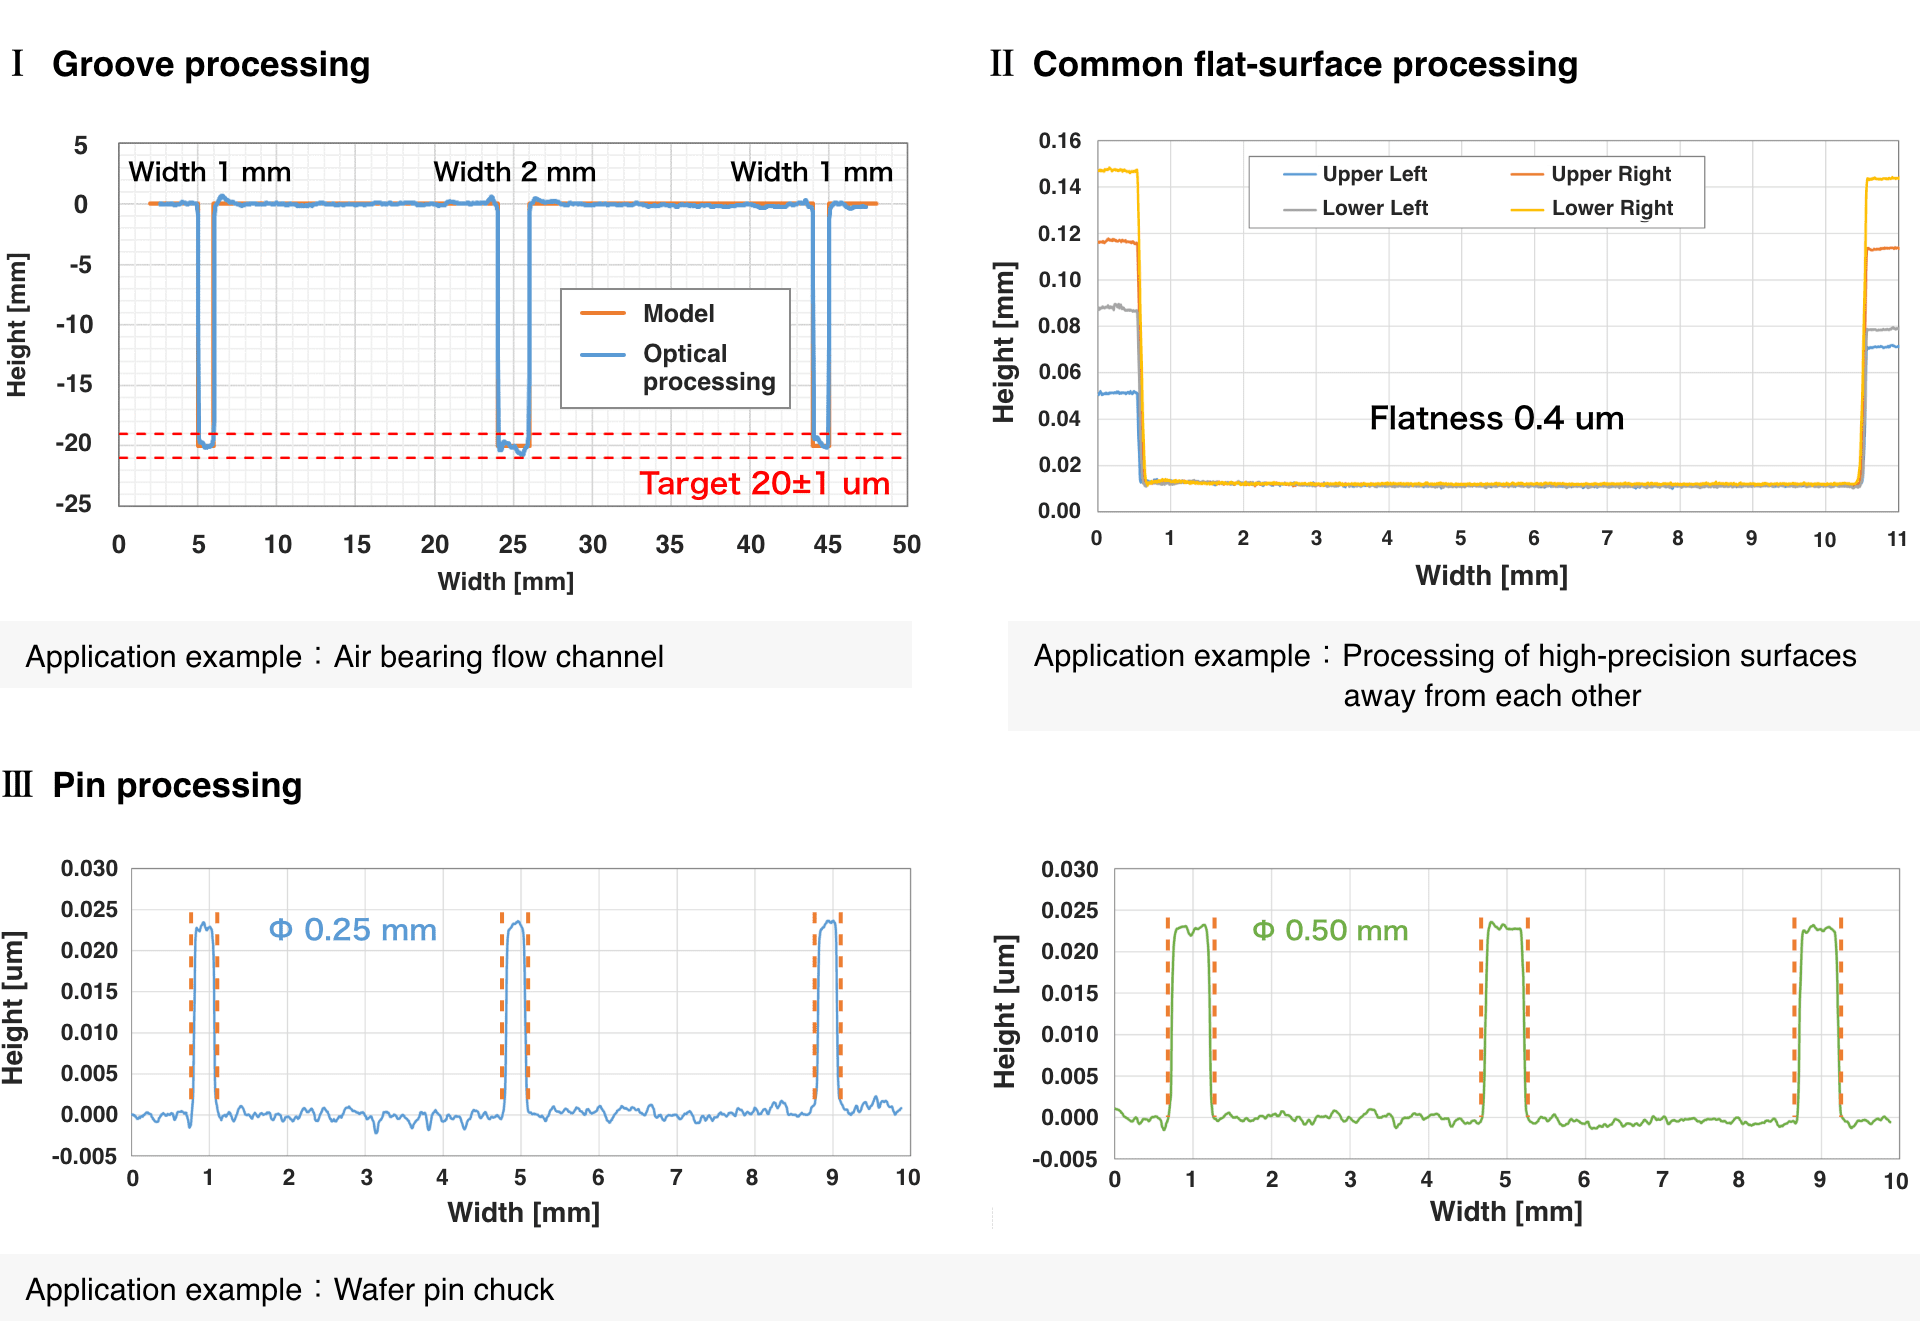 Data from processing results for each type of processing